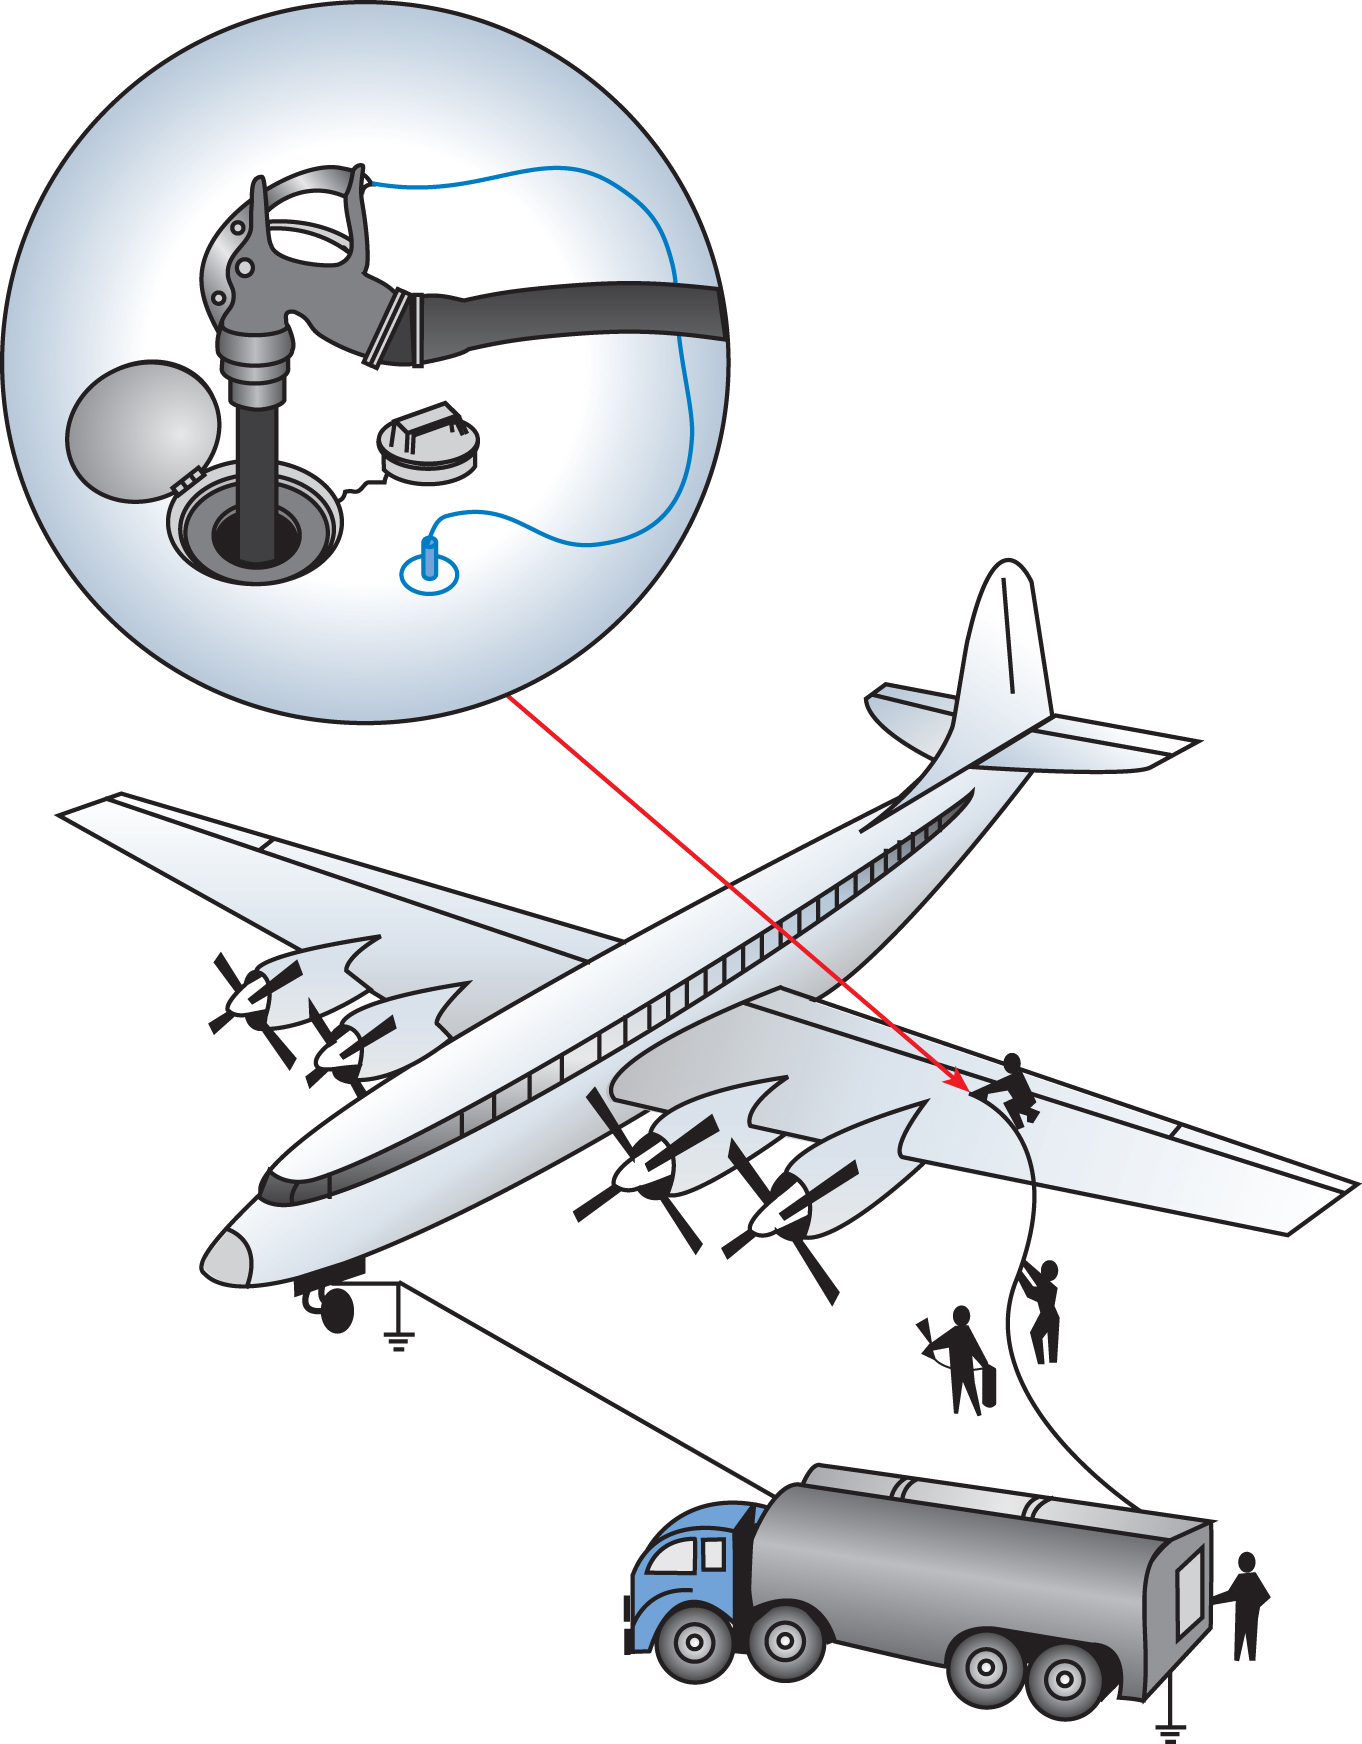 Aircraft Systems: Types of Electricity - Learn To Fly